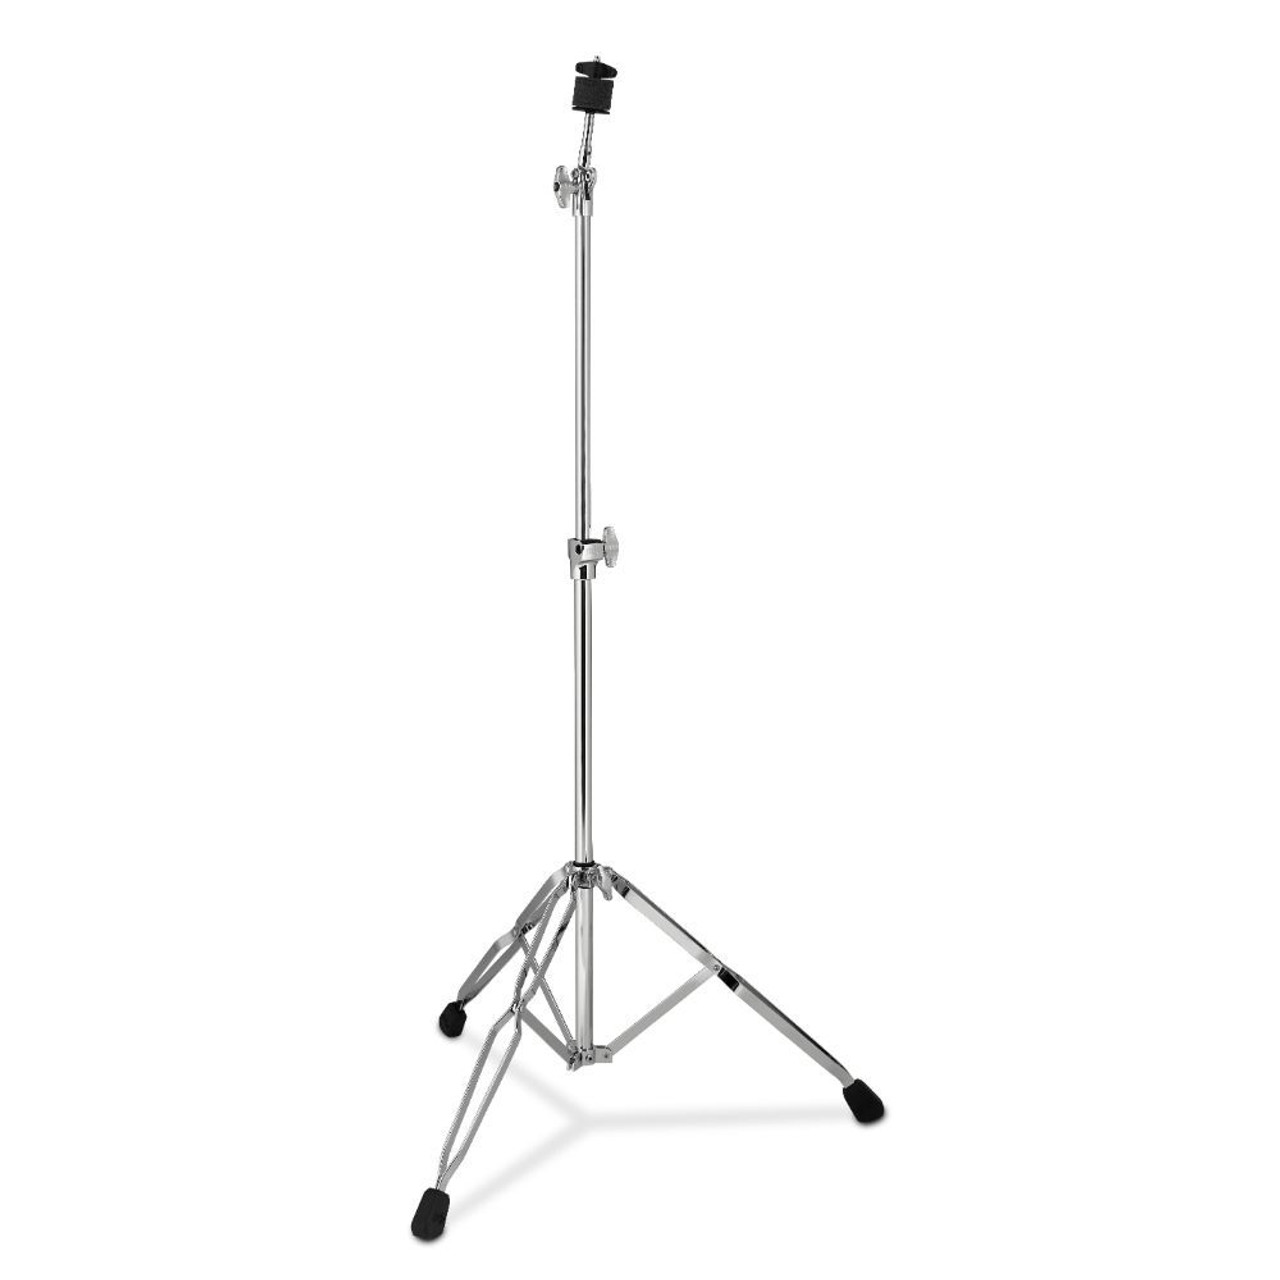 700　Cymbal　Light　Straight　Series　PDP　Stand